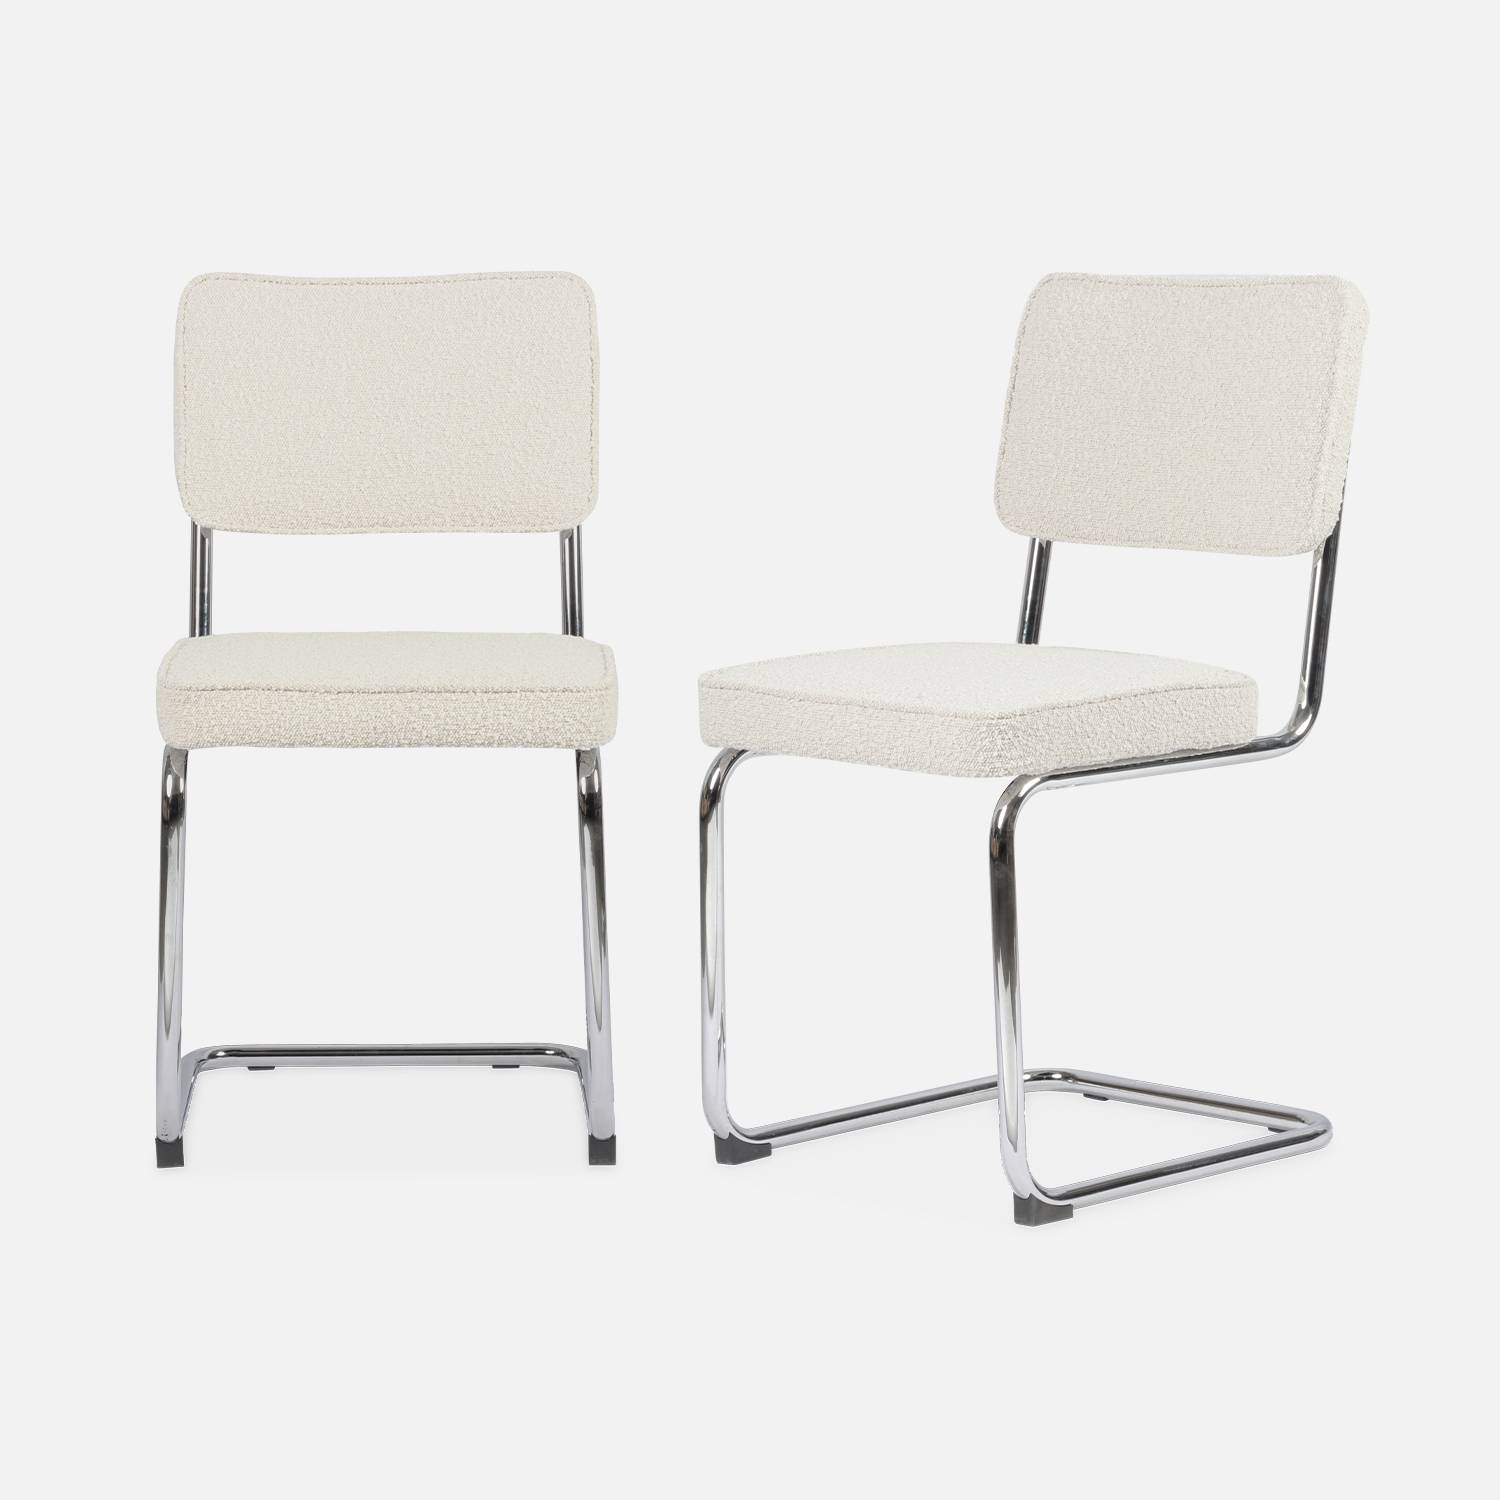 Pair of boucle cantilever dining chairs, 46x54.5x81cm, White | sweeek